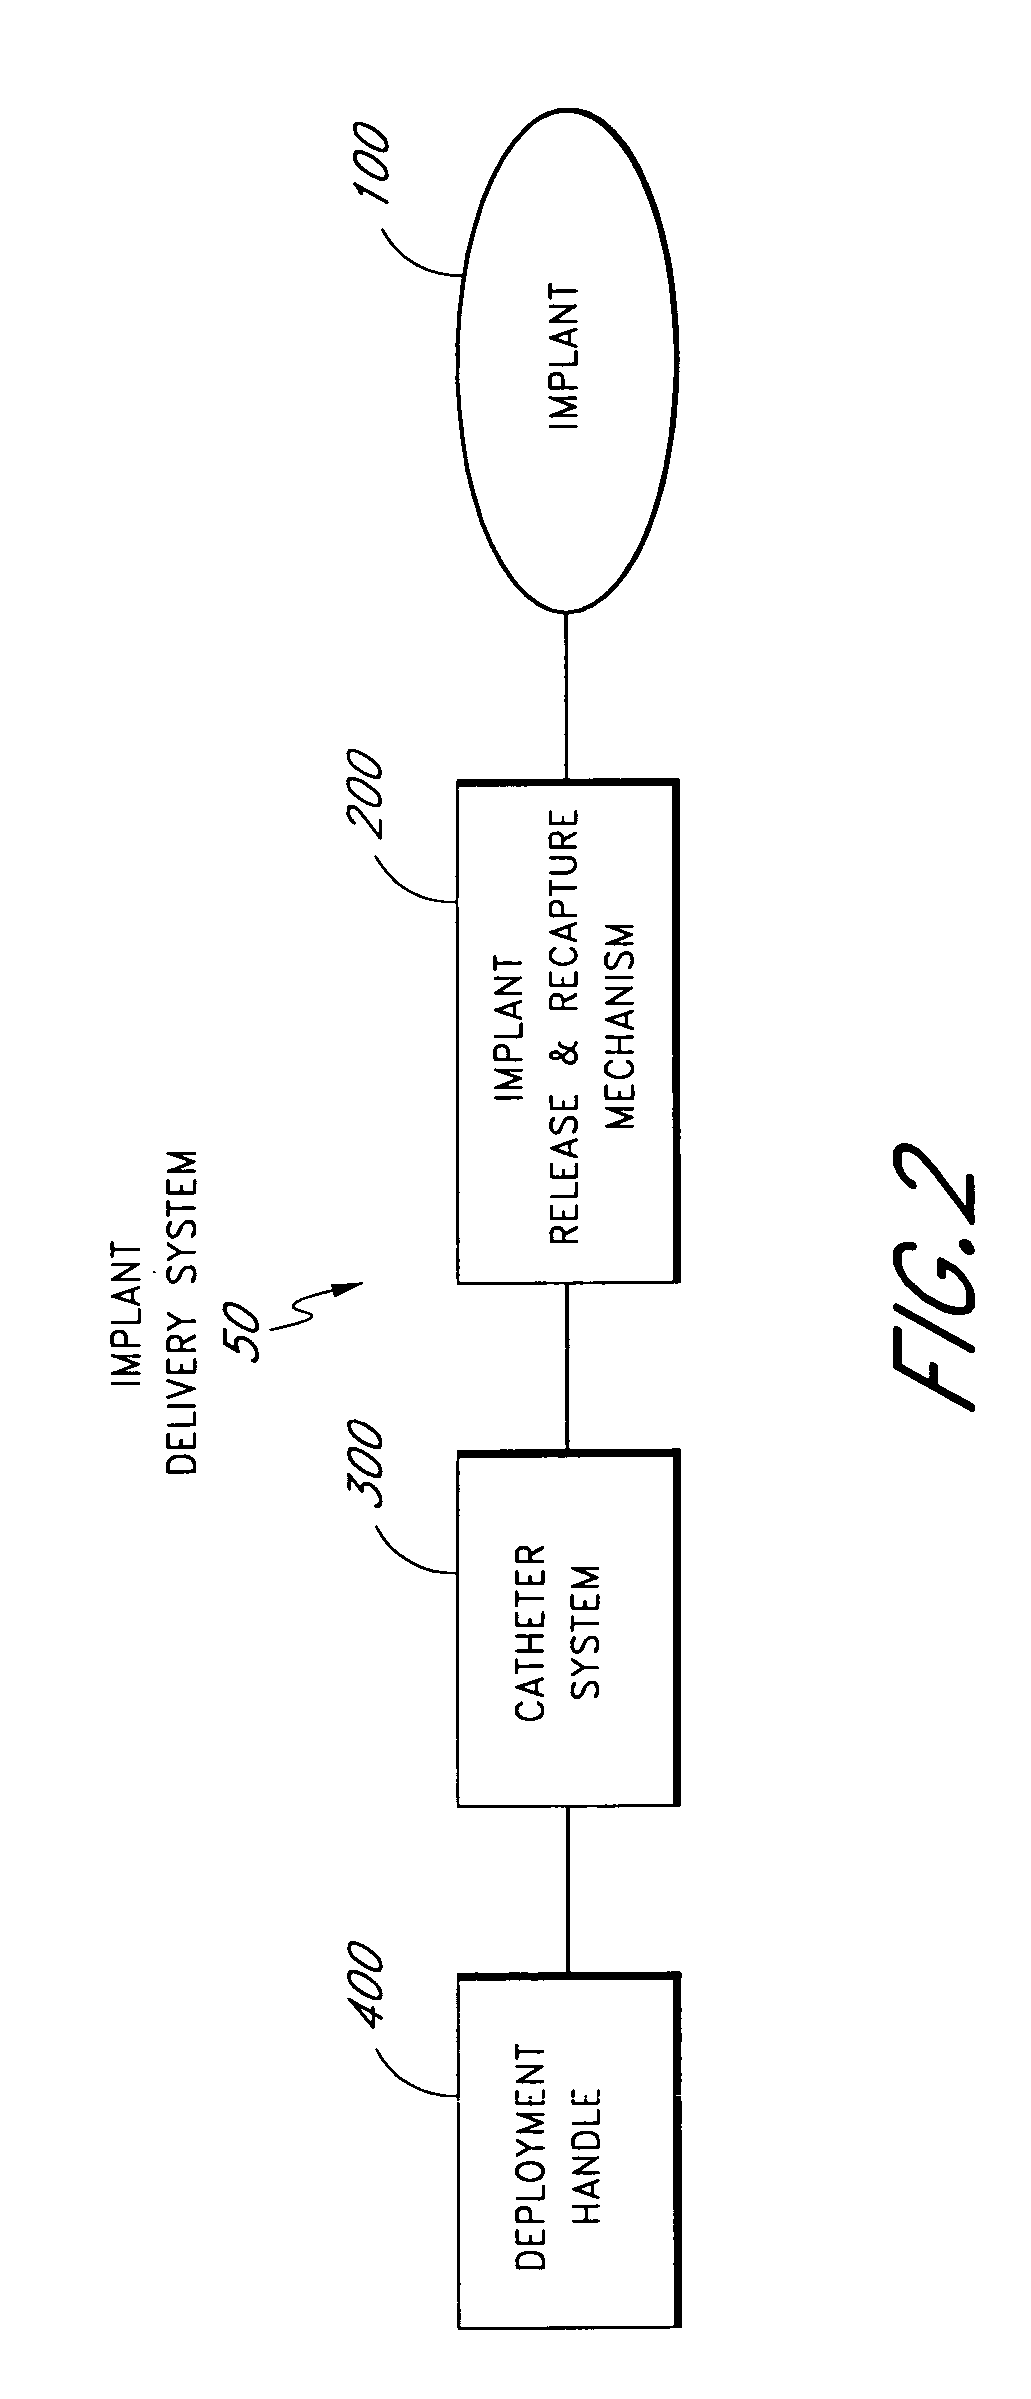 Method and apparatus for delivering an implant without bias to a left atrial appendage